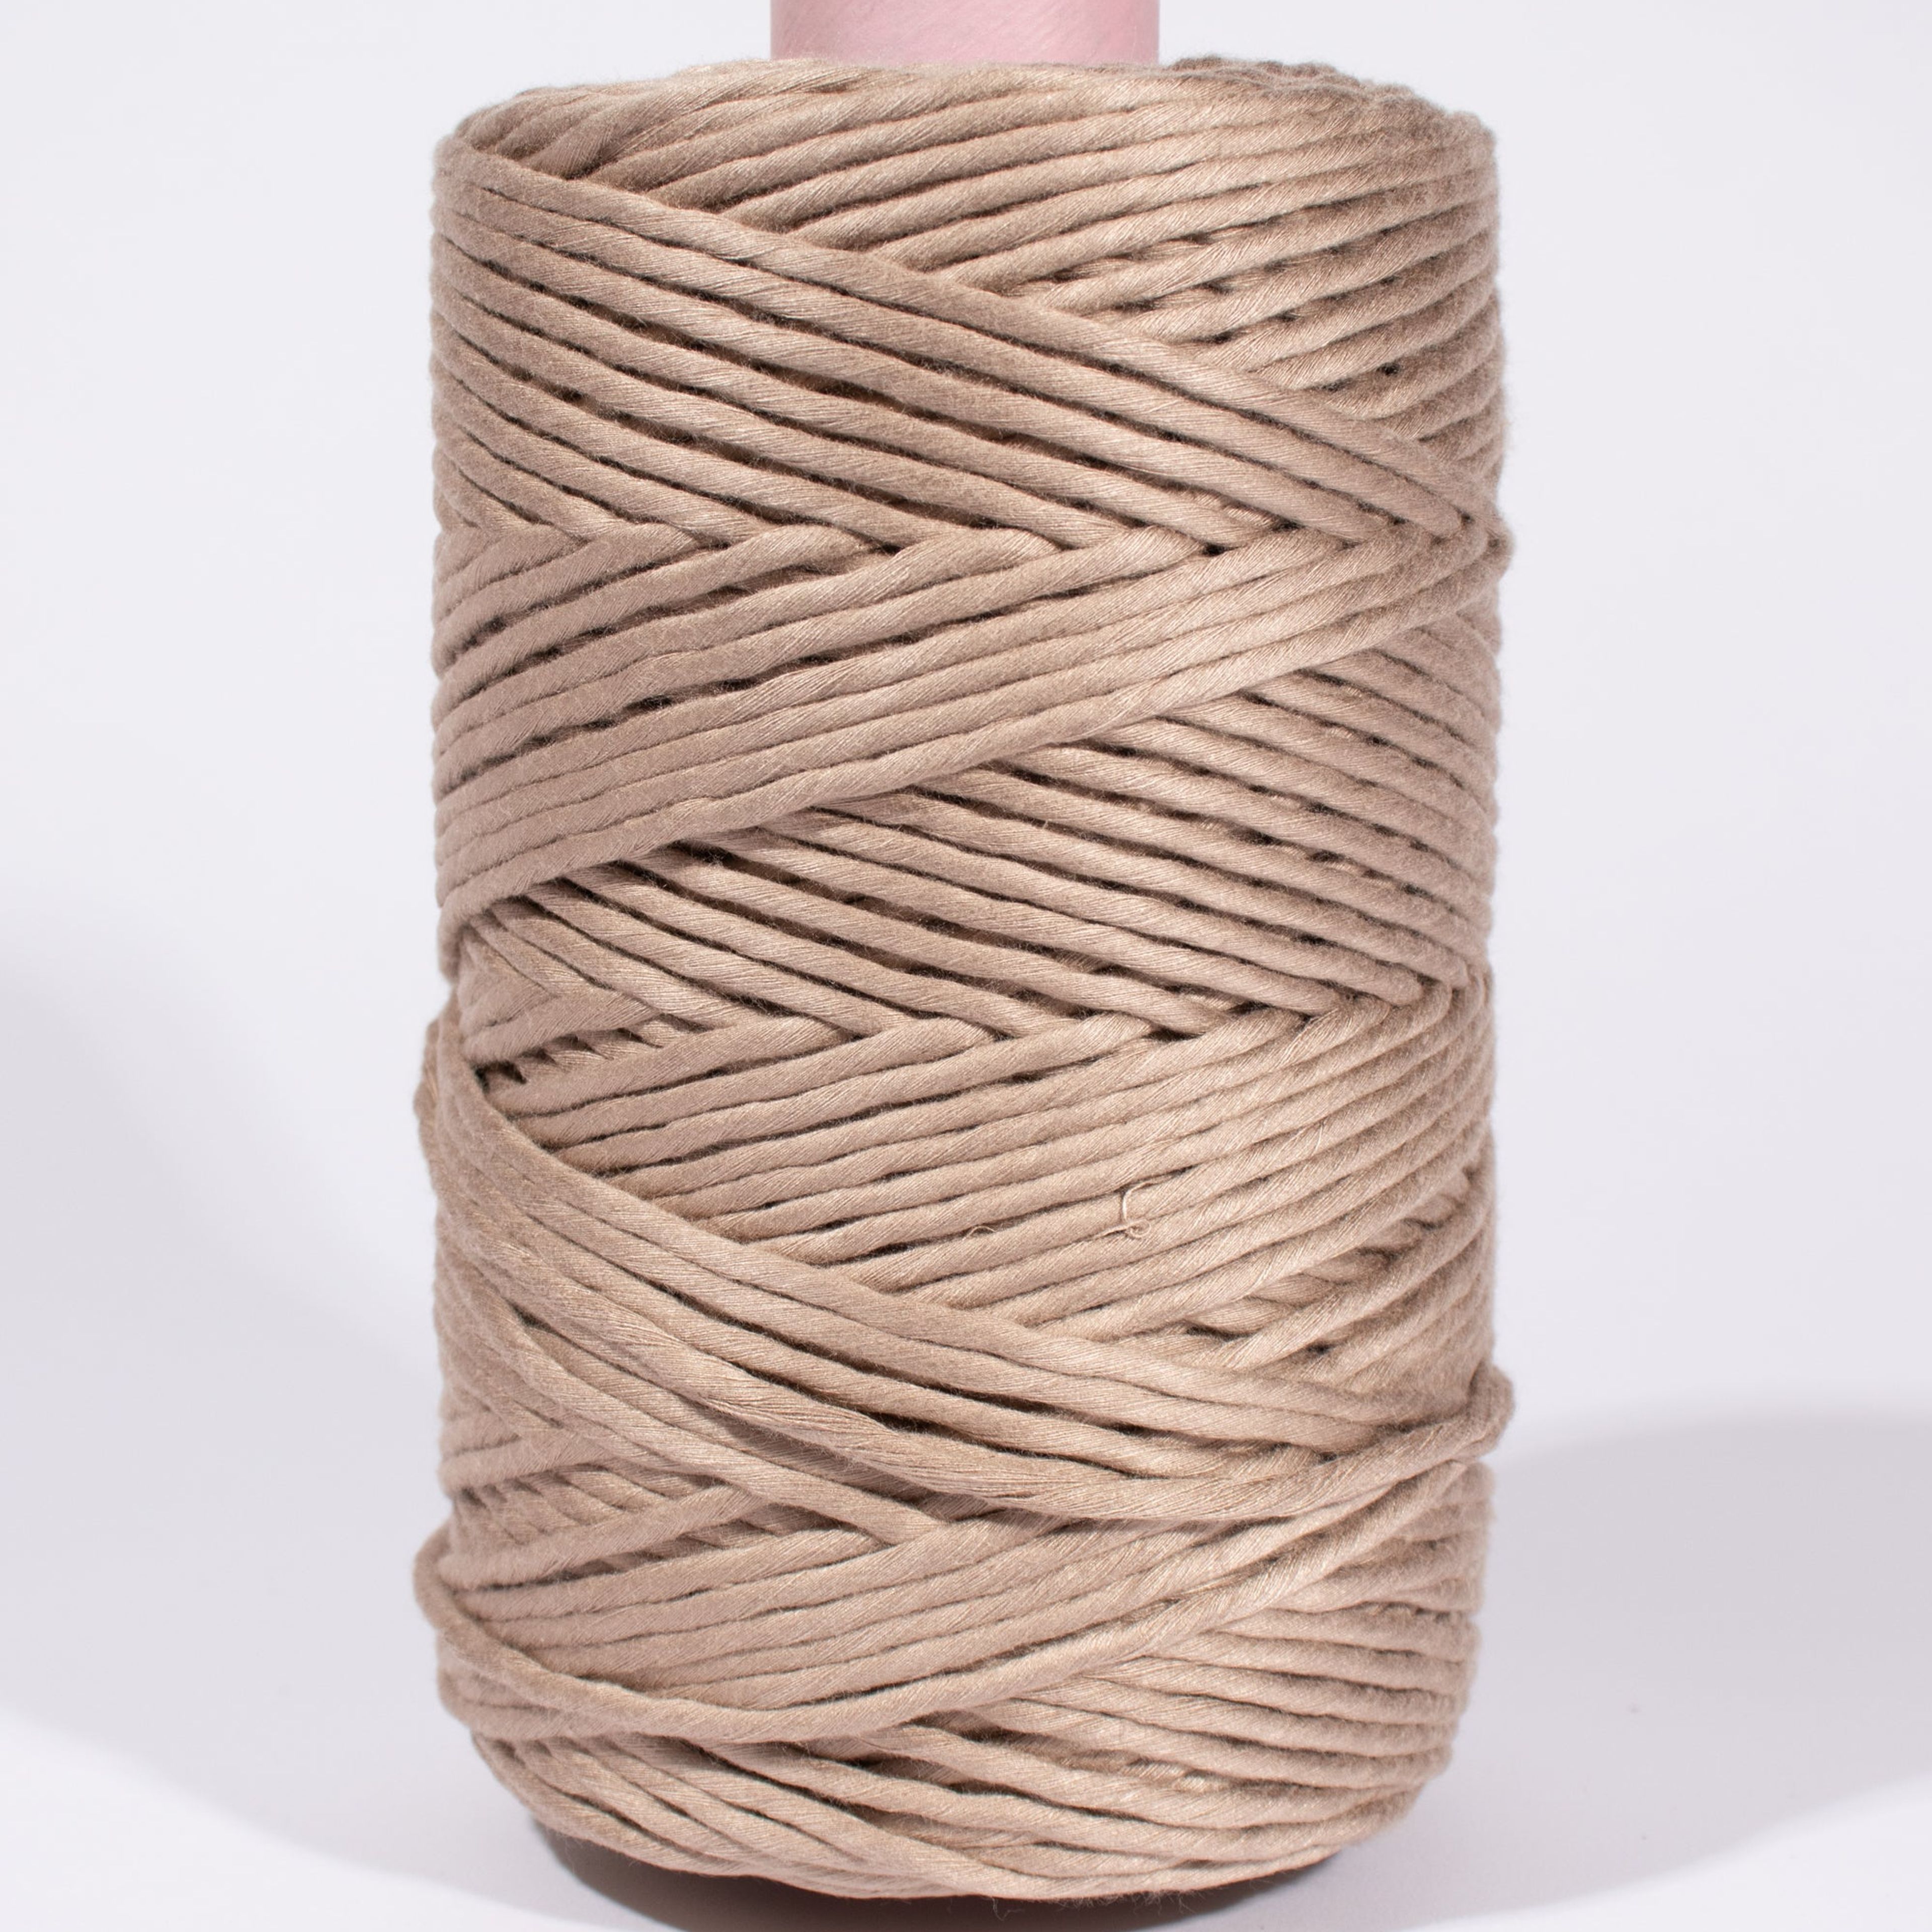 5mm Bamboo String - 600ft